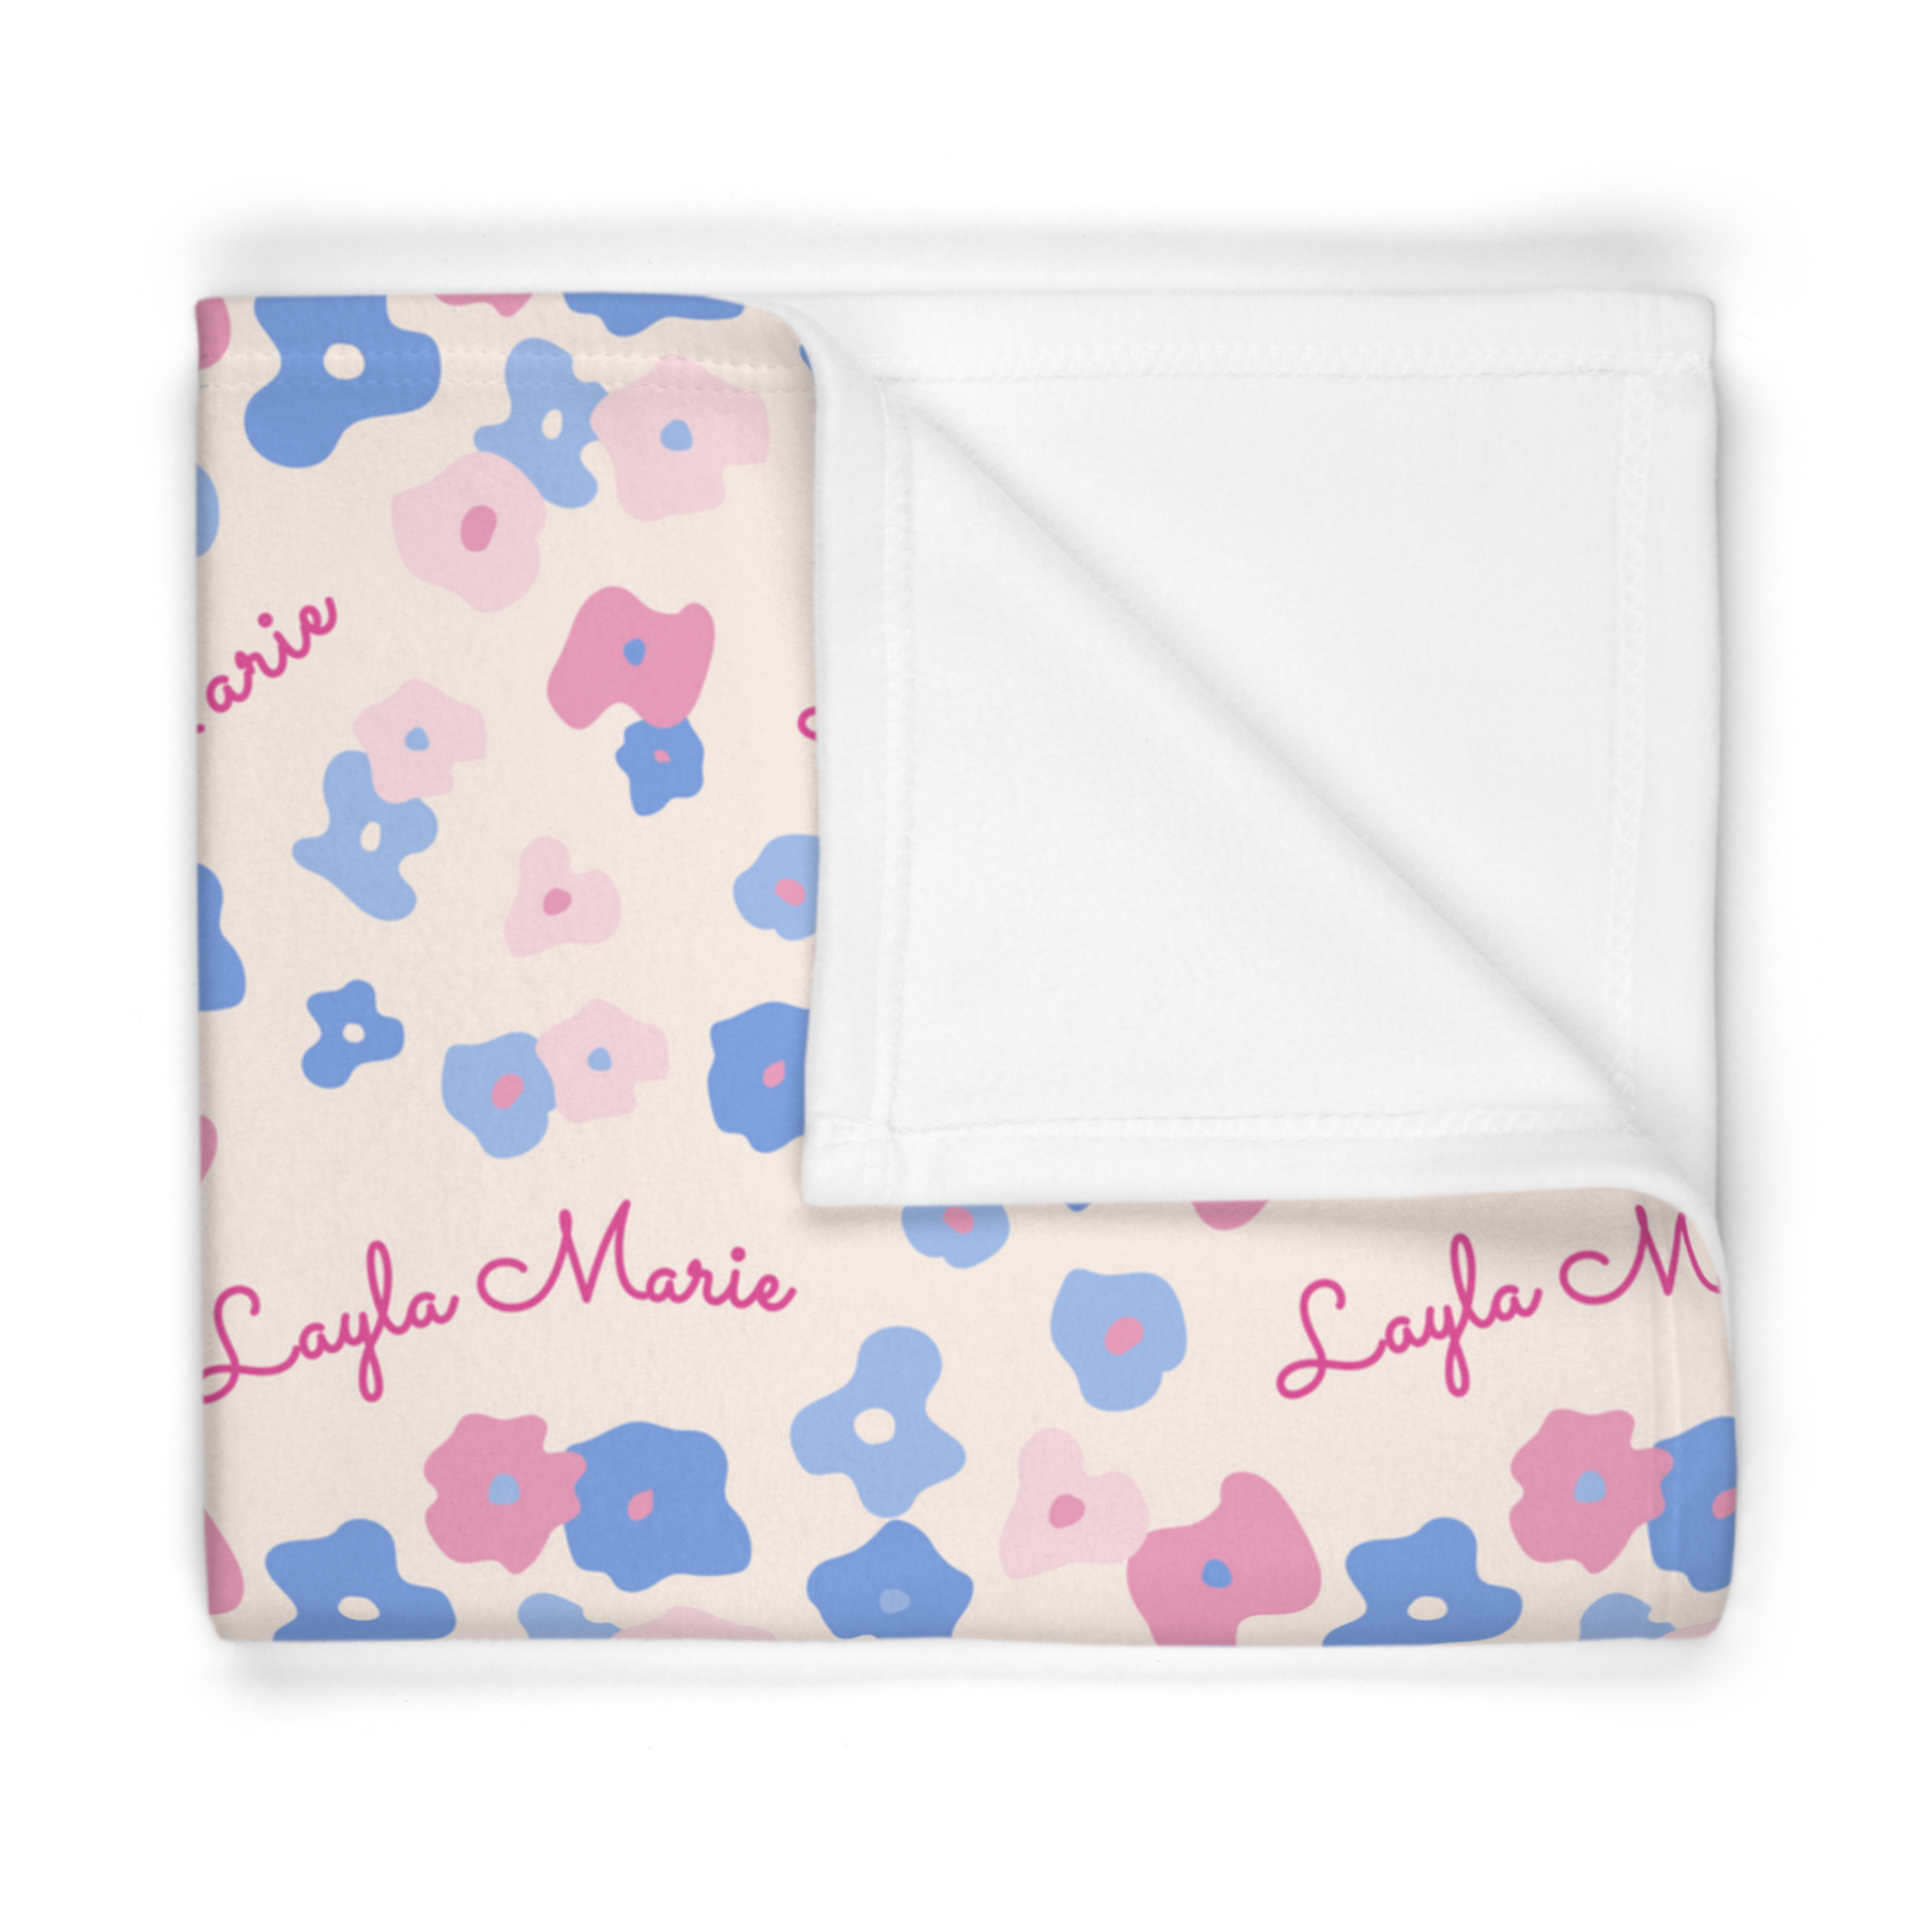 Folded fleece fabric personalized baby blanket in graphic pink and blue daisy pattern